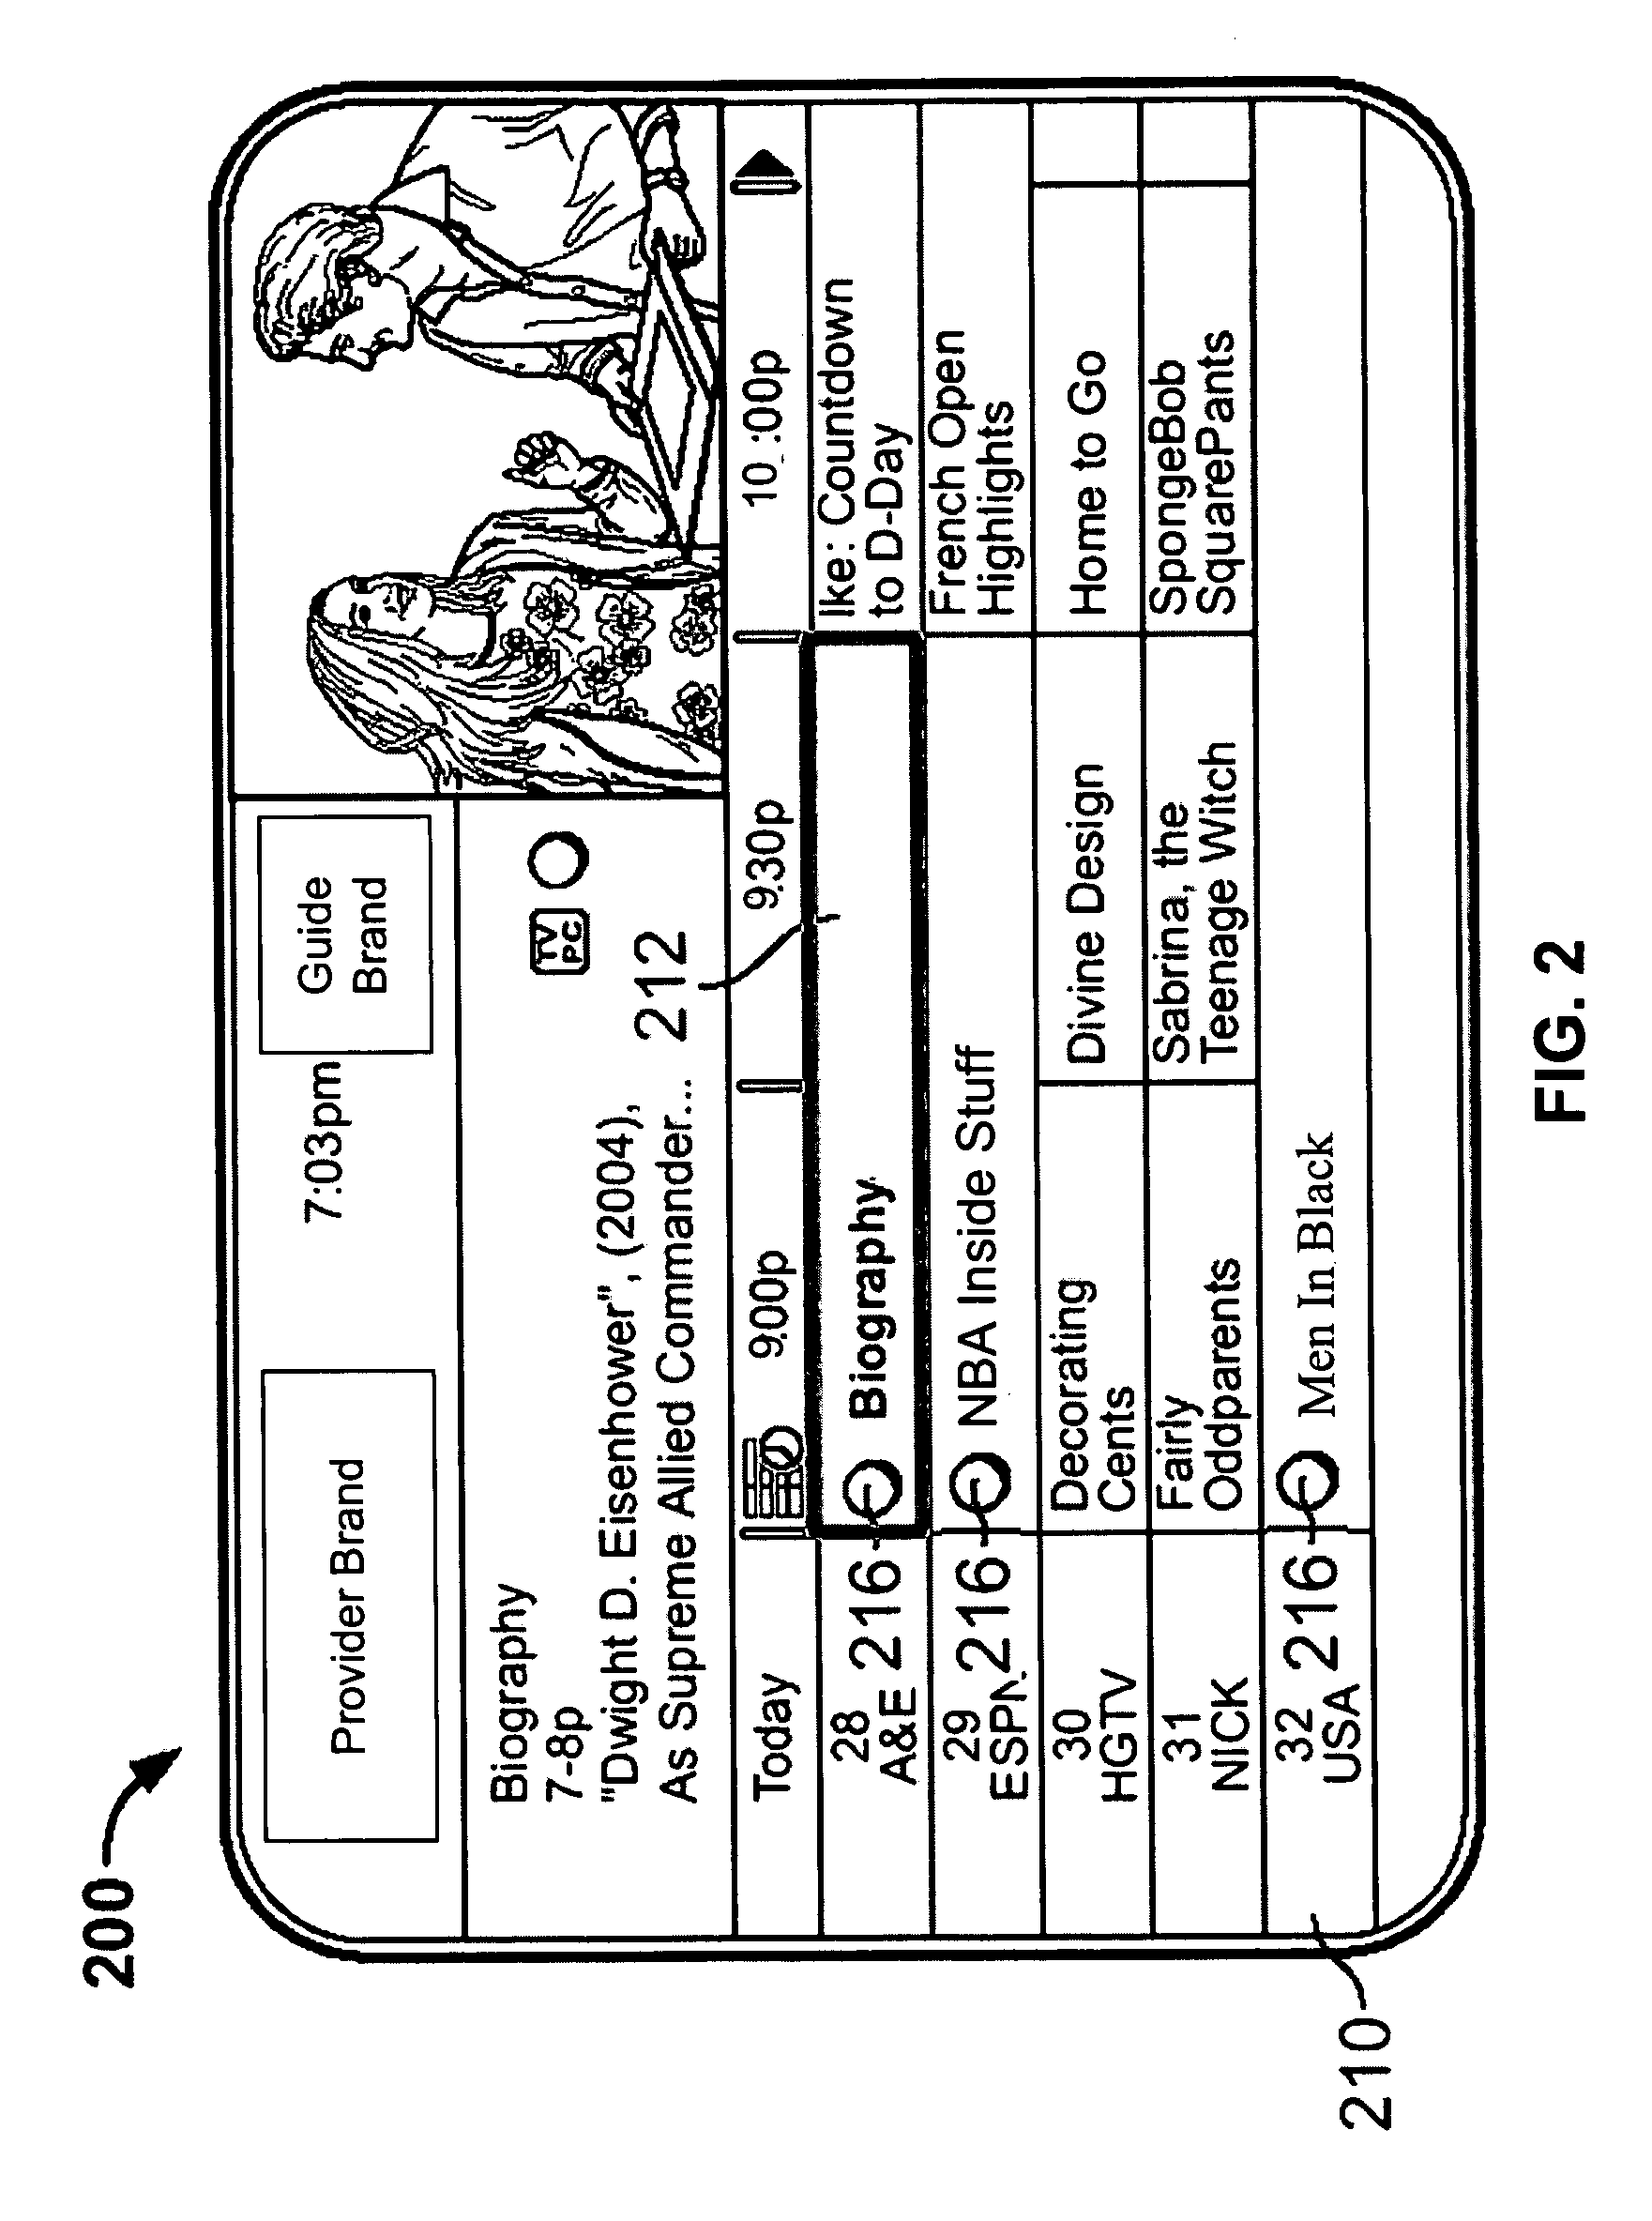 Systems and methods for viewing substitute media while fast forwarding past an advertisement